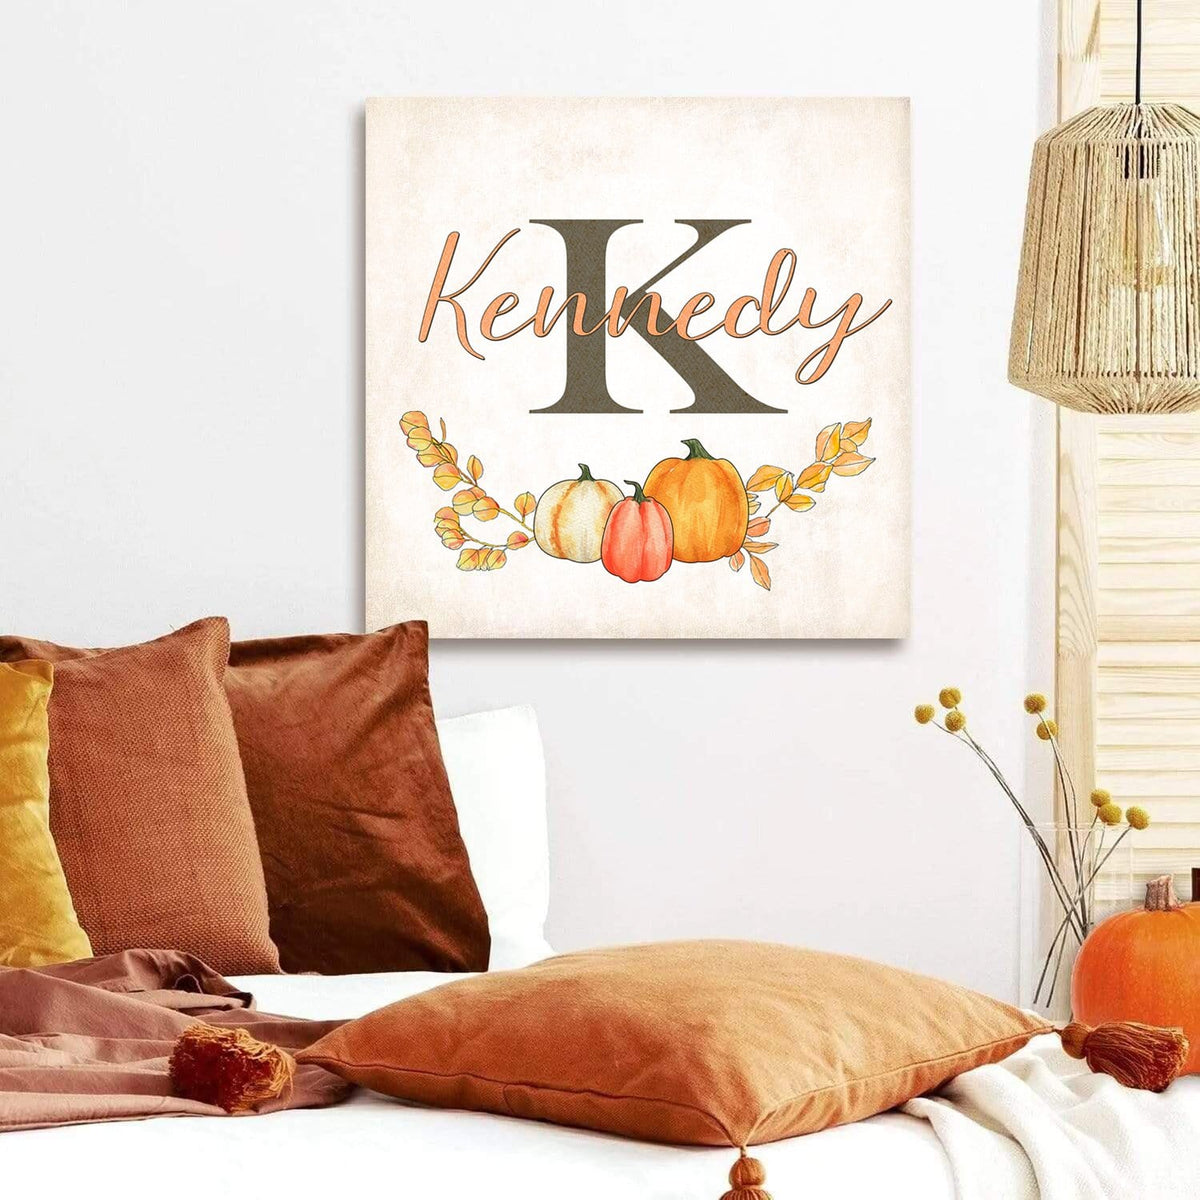 Personalized fall decor display from Personal Prints